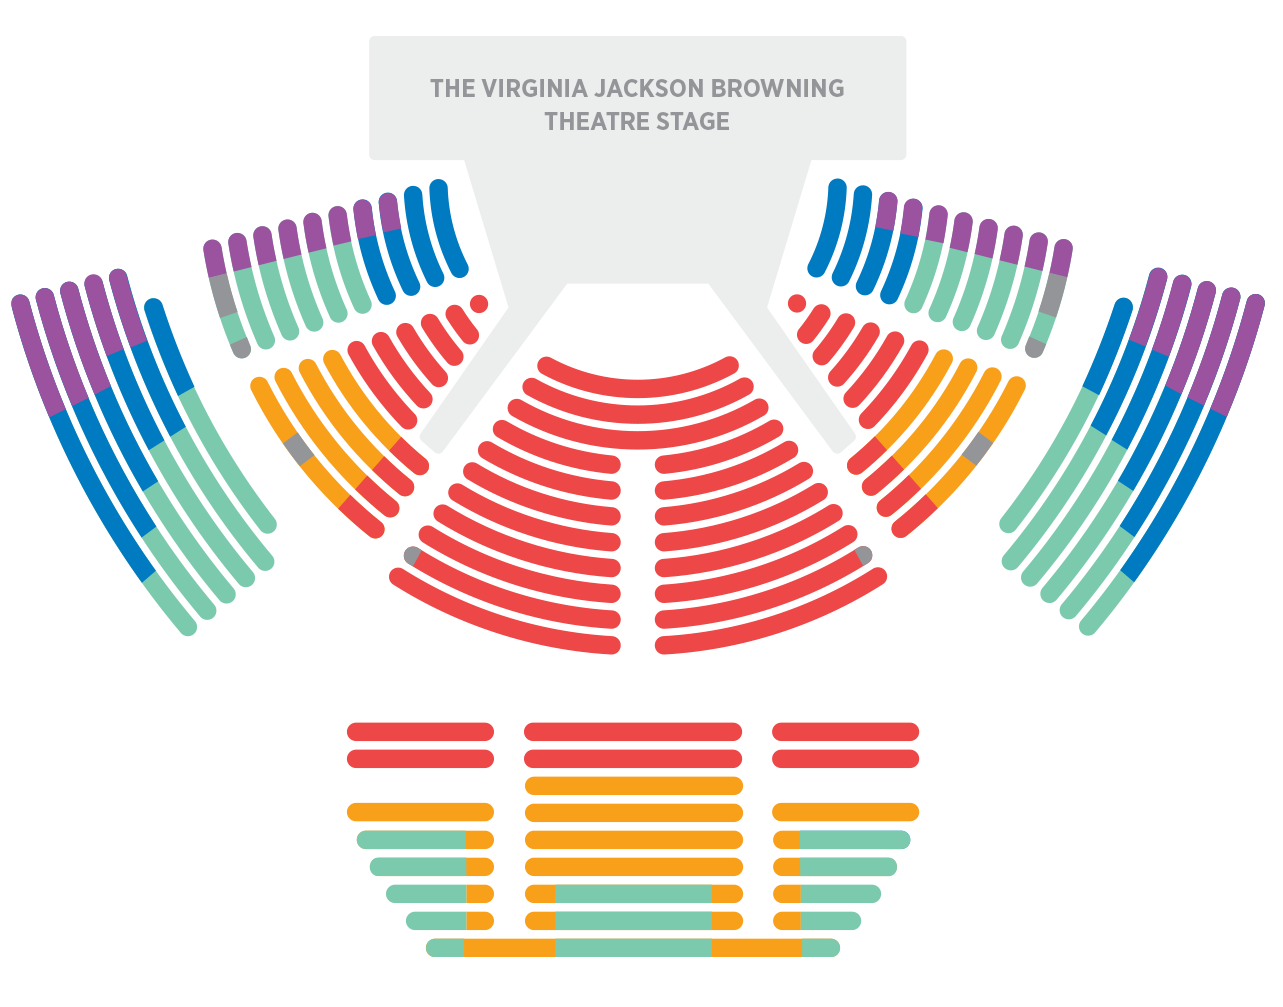 Color-coded seat map of the OTSL theater